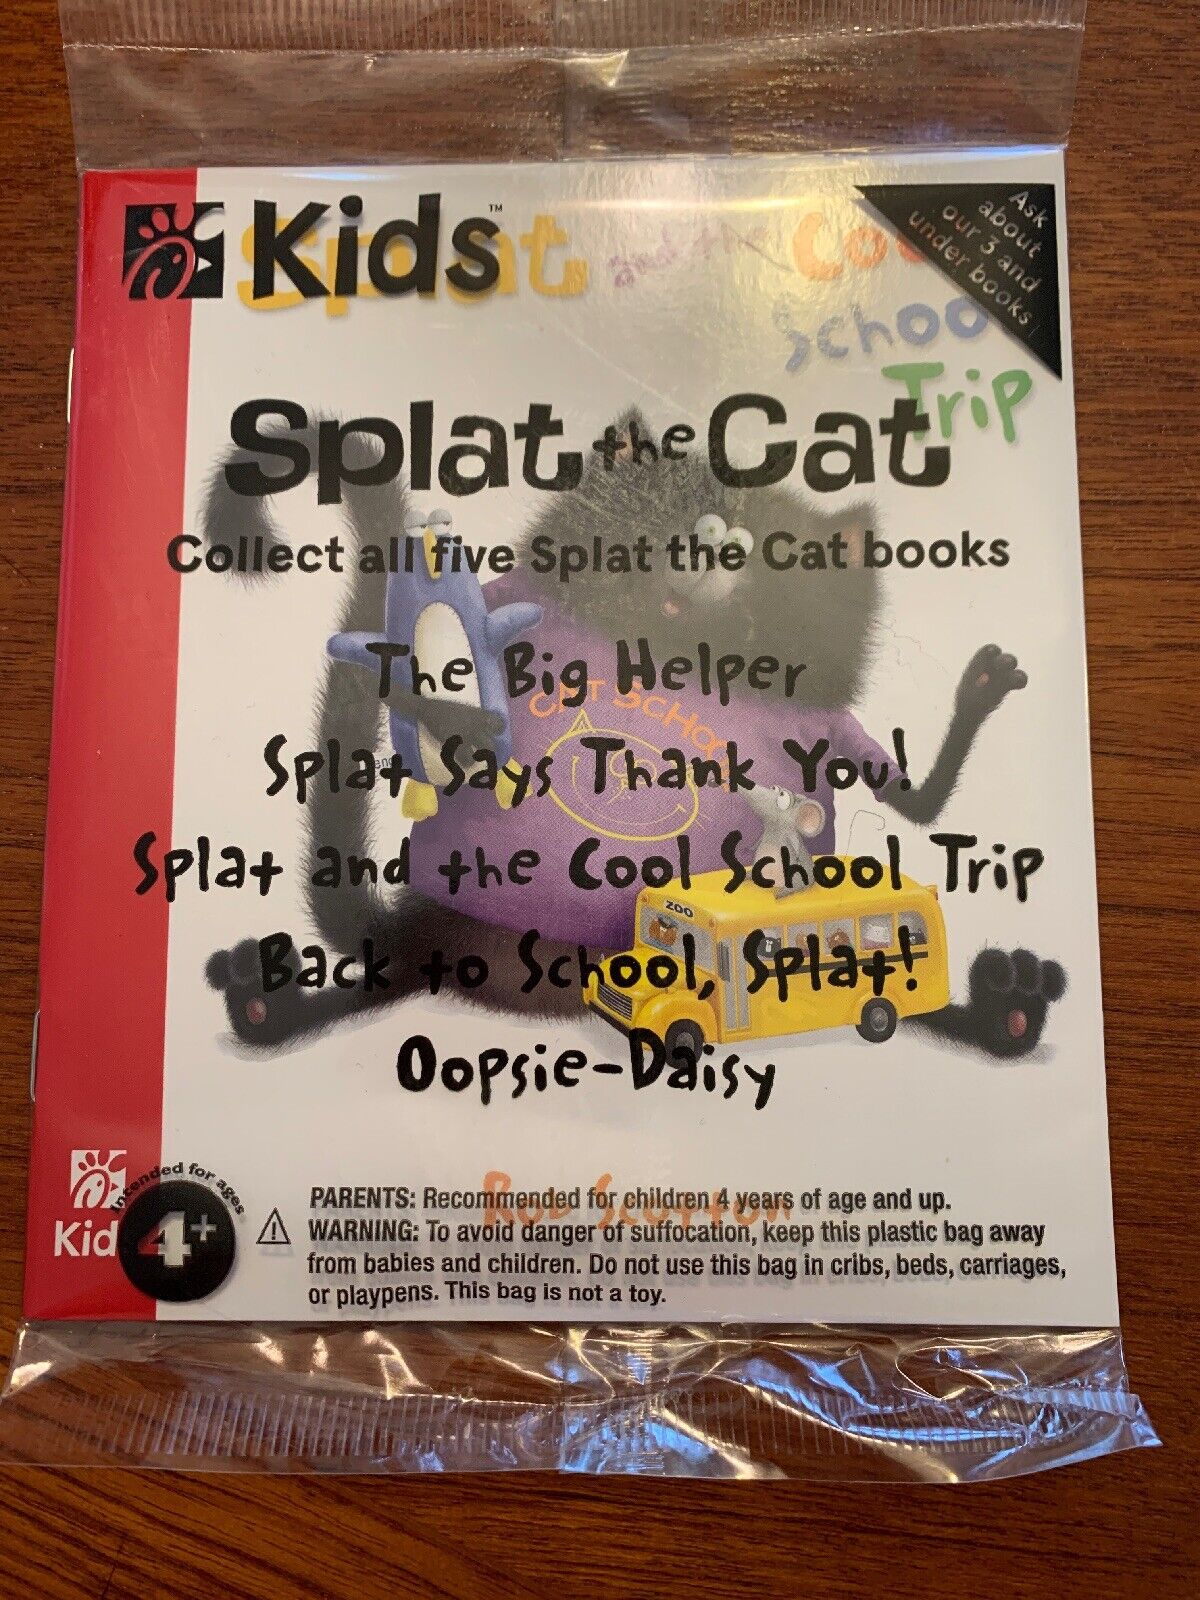 Back to School Oopsie-Daisy NEW Splat The Cat Book Lot Chick-Fil-A Kids Meal 